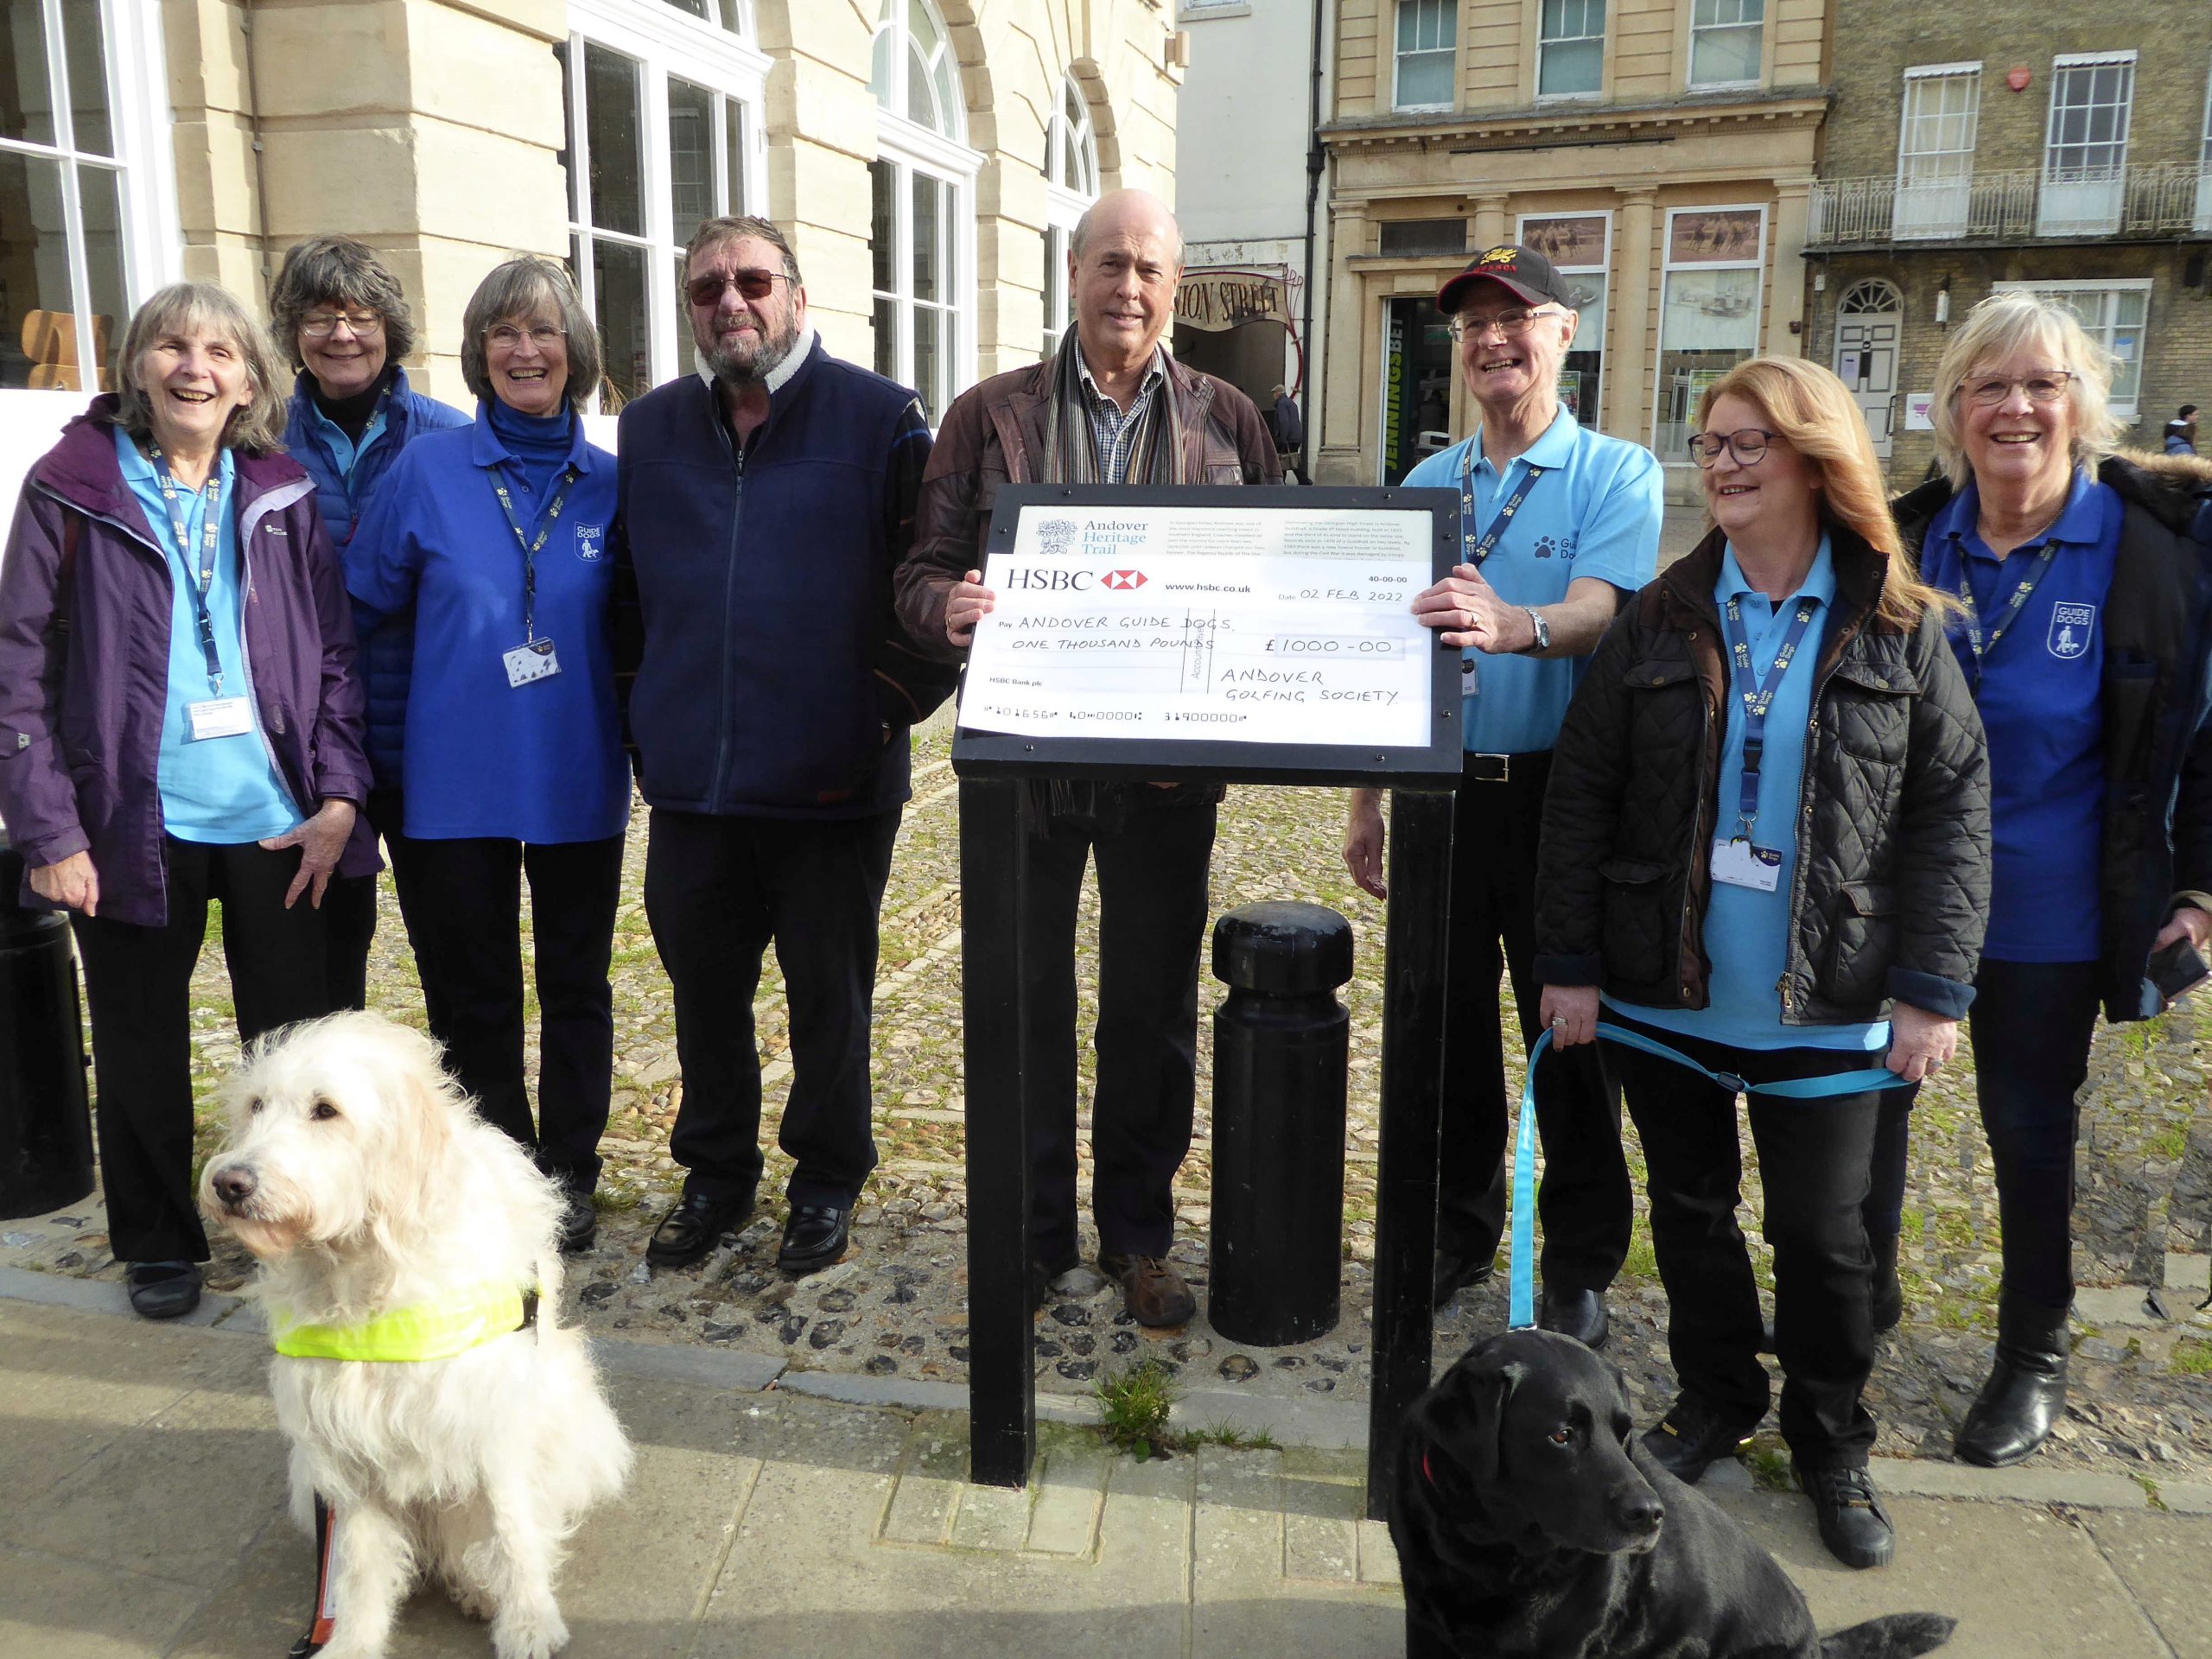 Andover Golfing Society has raised £1,000 for Guide Dogs